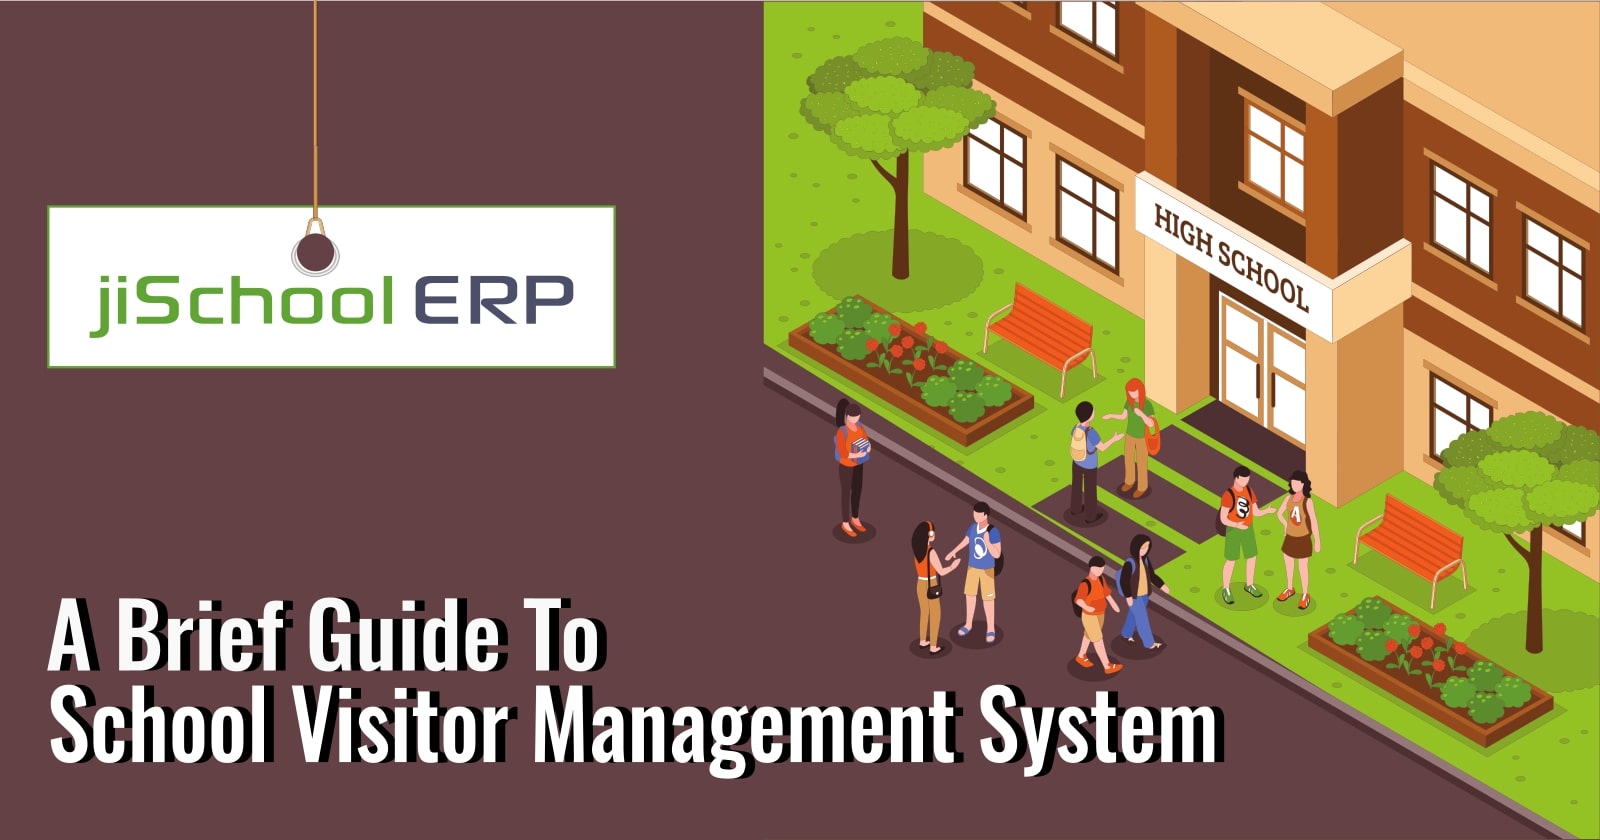 A Brief Guide To School Visitor Management System!